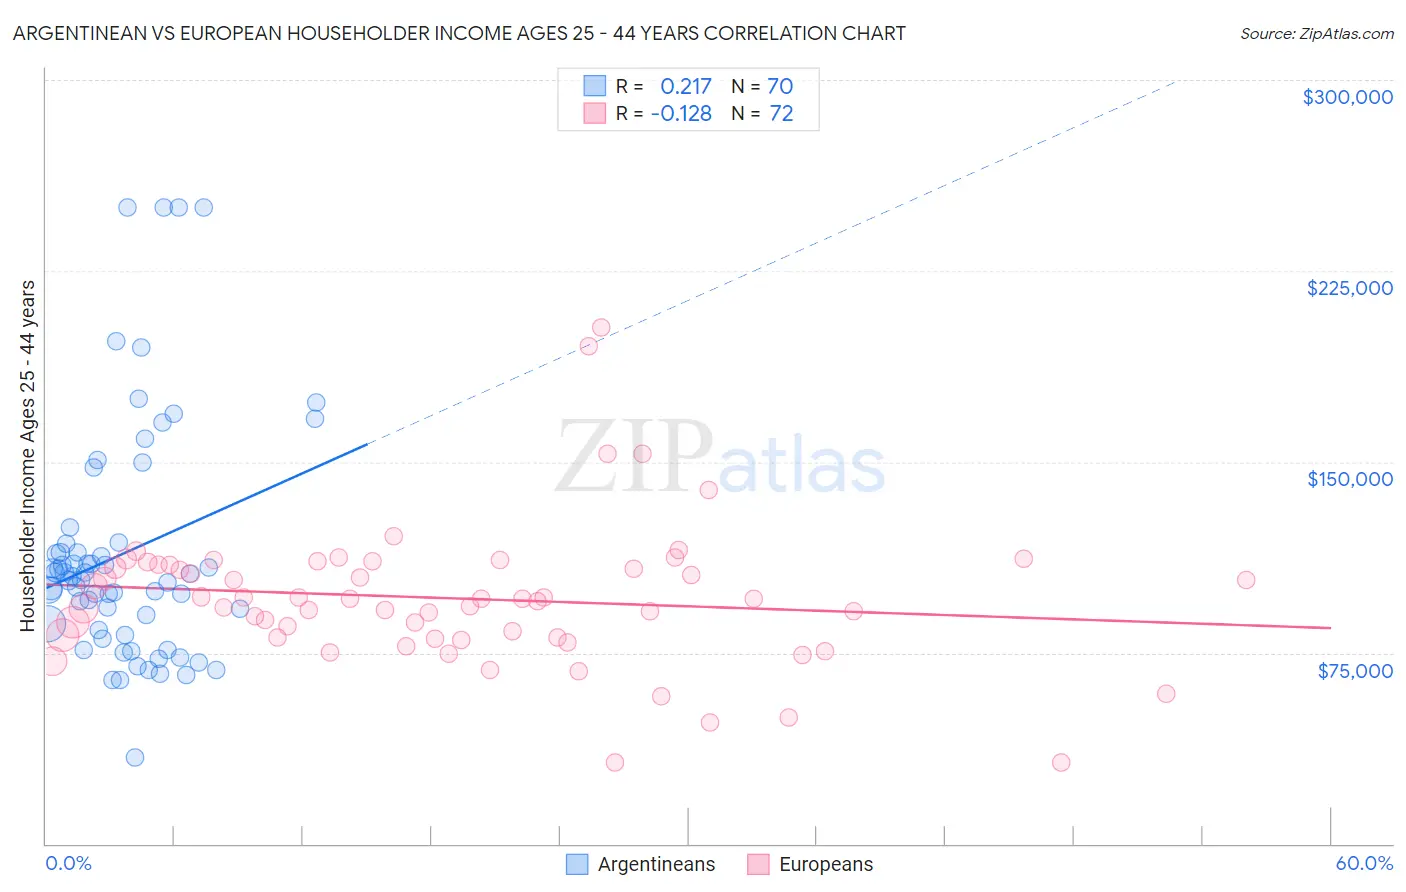 Argentinean vs European Householder Income Ages 25 - 44 years